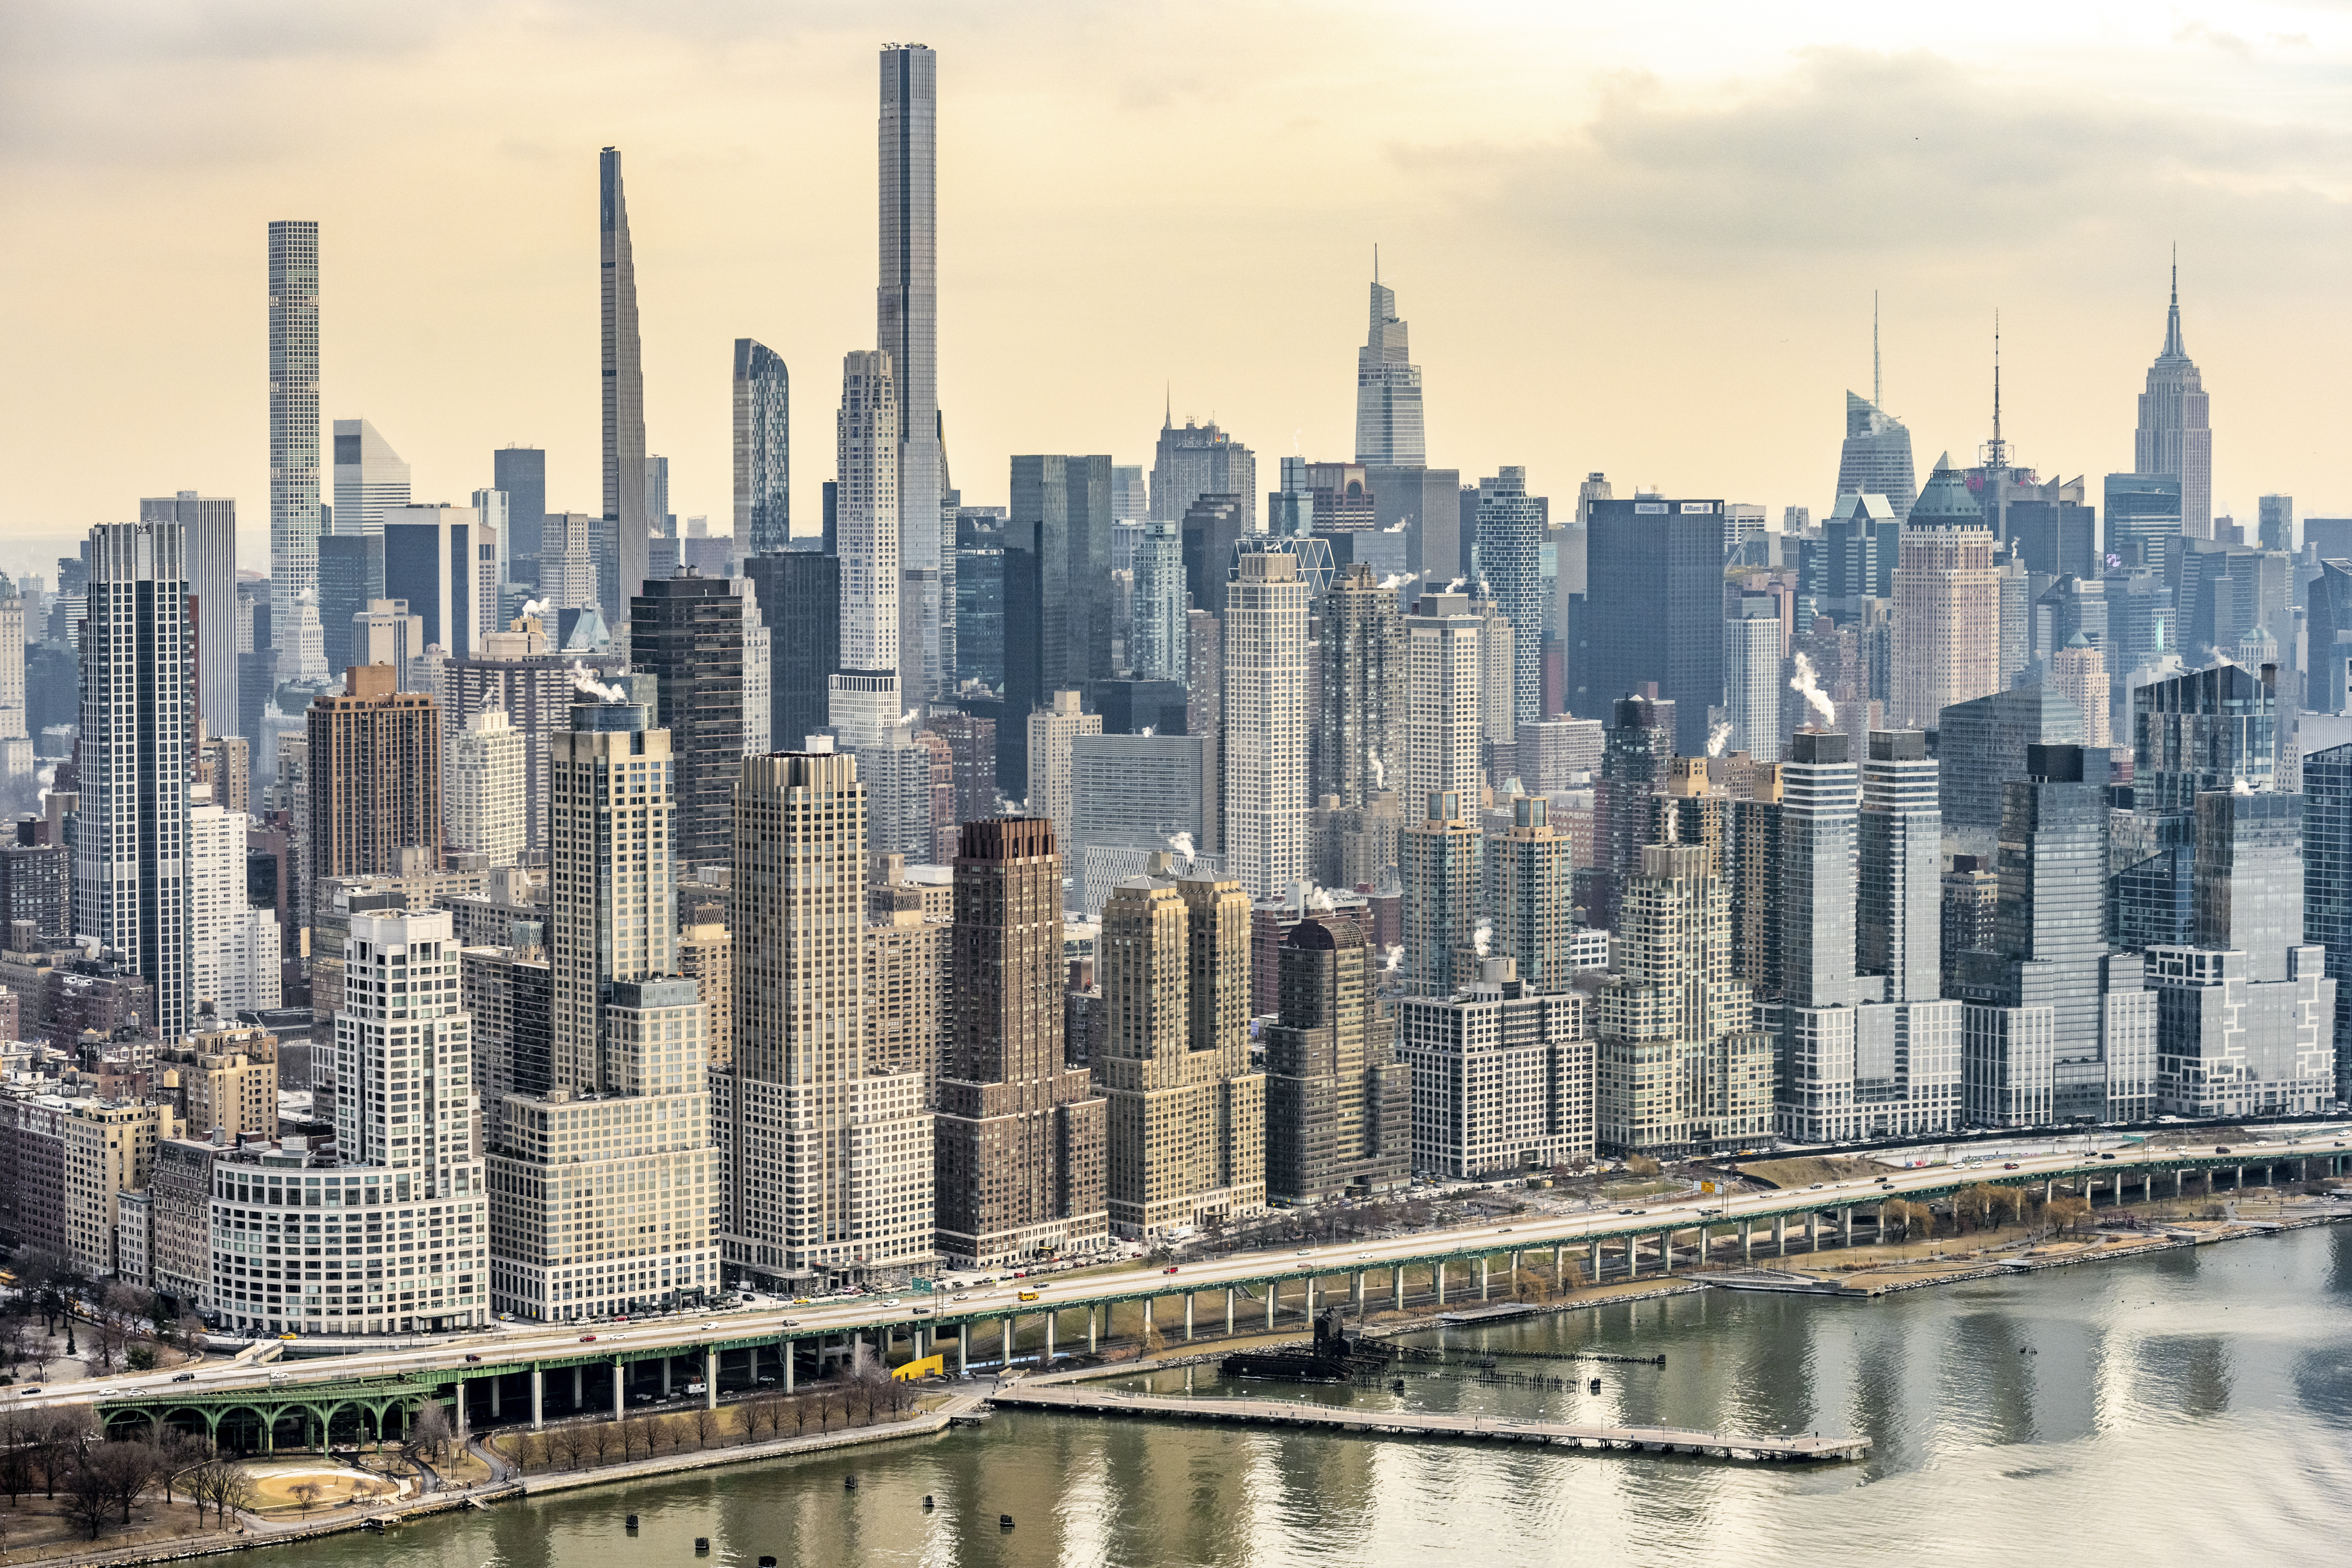 NYC is sinking under the weight of its skyscrapers, new study warns -  National